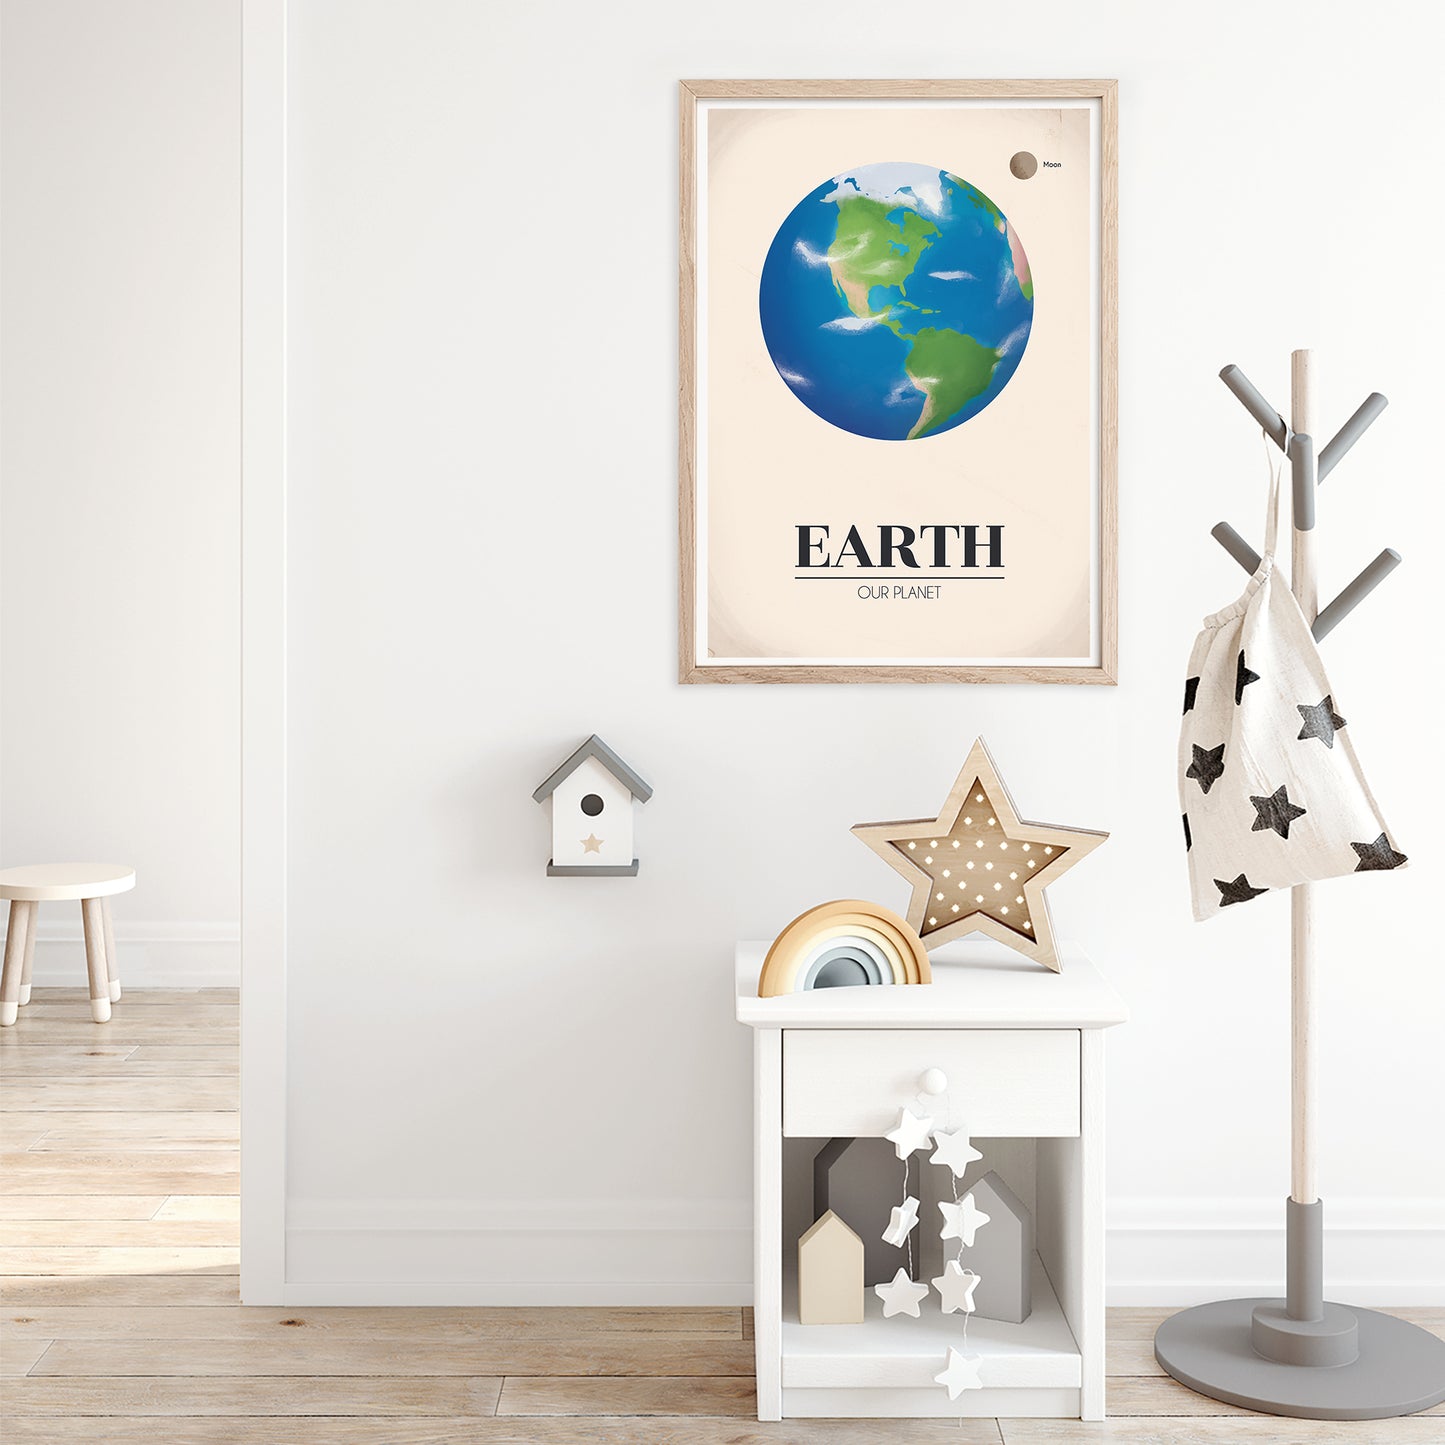 Planets of the solar system print - Earth